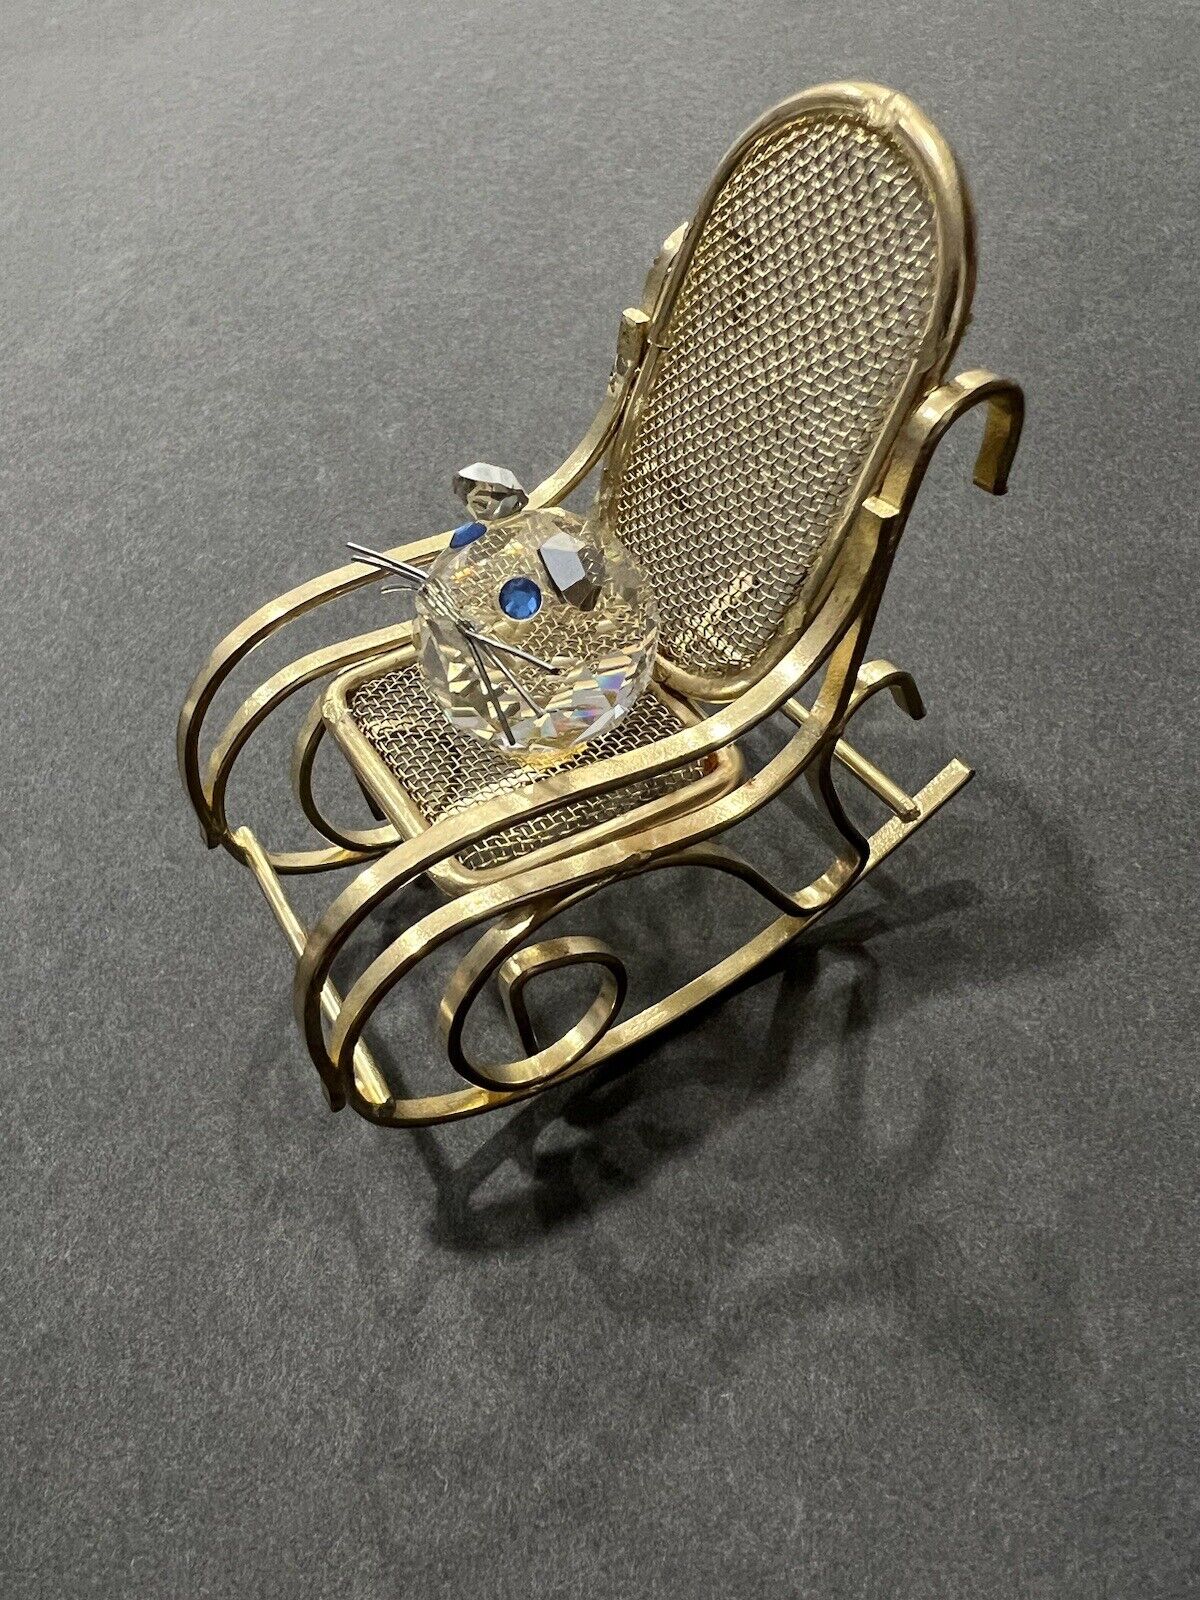 ADORABLE MINIATURE GOLD ROCKING CHAIR W/MOUSE